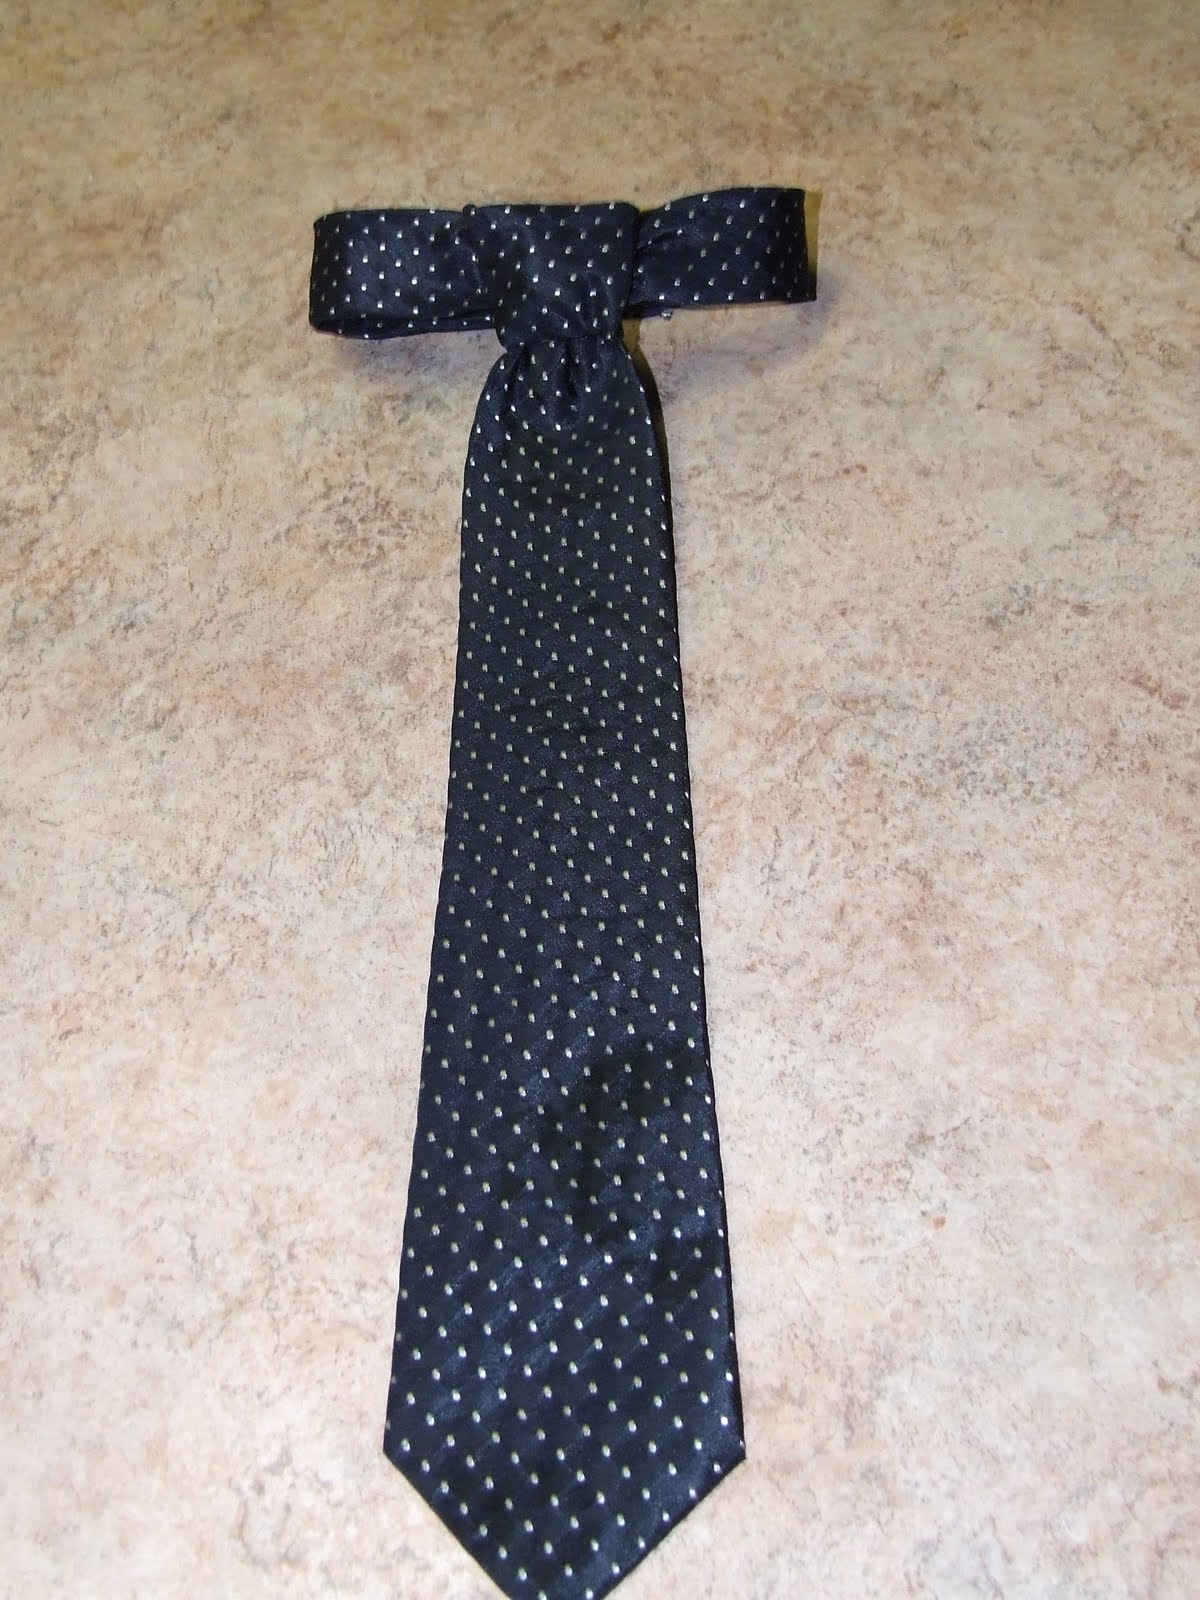 My Inner Need to Create...: Make a Man's Tie into a Velcro Kid's Tie...